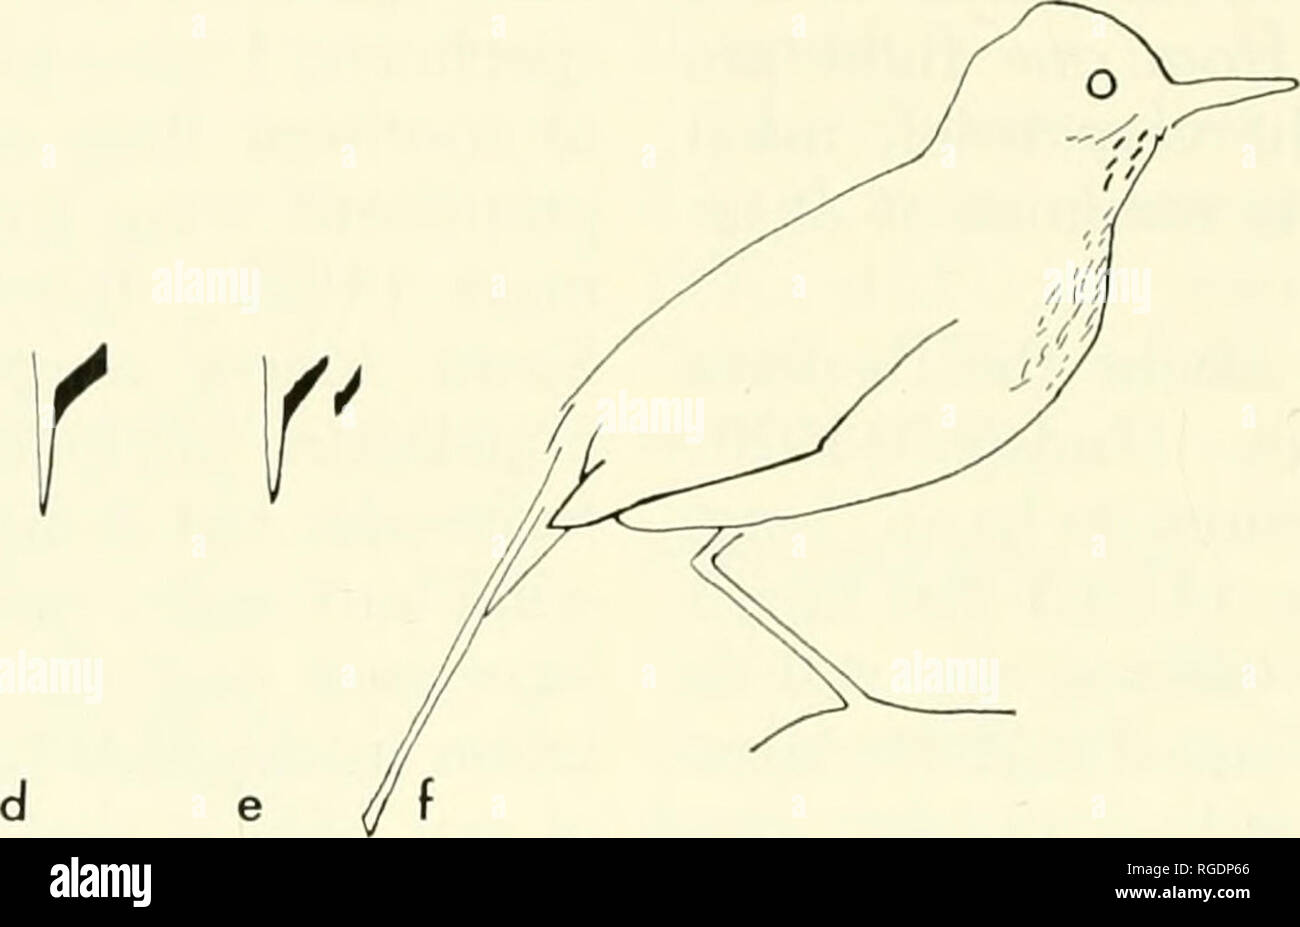 . Bulletin of the Museum of Comparative Zoology at Harvard College. Zoology. 258 Bulletin Museum of Com pa rat ice Zoology, Vol. 141, No. 5 ^ ^ If  i 1 1 i   l I I I L.. Figure 9. Vocalizations and Pose of Agriornis species. 9a. &quot;pyuk&quot; of A. montana, Argentina; 9b. &quot;pyuk&quot; of same indi- vidual A. montana; 9c. &quot;wheet hyou&quot; of gray Agn'ornis, Ecuador, (also A. montana?); 9d. &quot;t-eek&quot; of A. Itvida; 9e. &quot;t-eek-ek&quot; of A. livida; 9f. pose of A. livida while uttering &quot;t-eek&quot; calls. have a &quot;long, low, plaintive whistle&quot; (Hnd- son, 192 Stock Photo